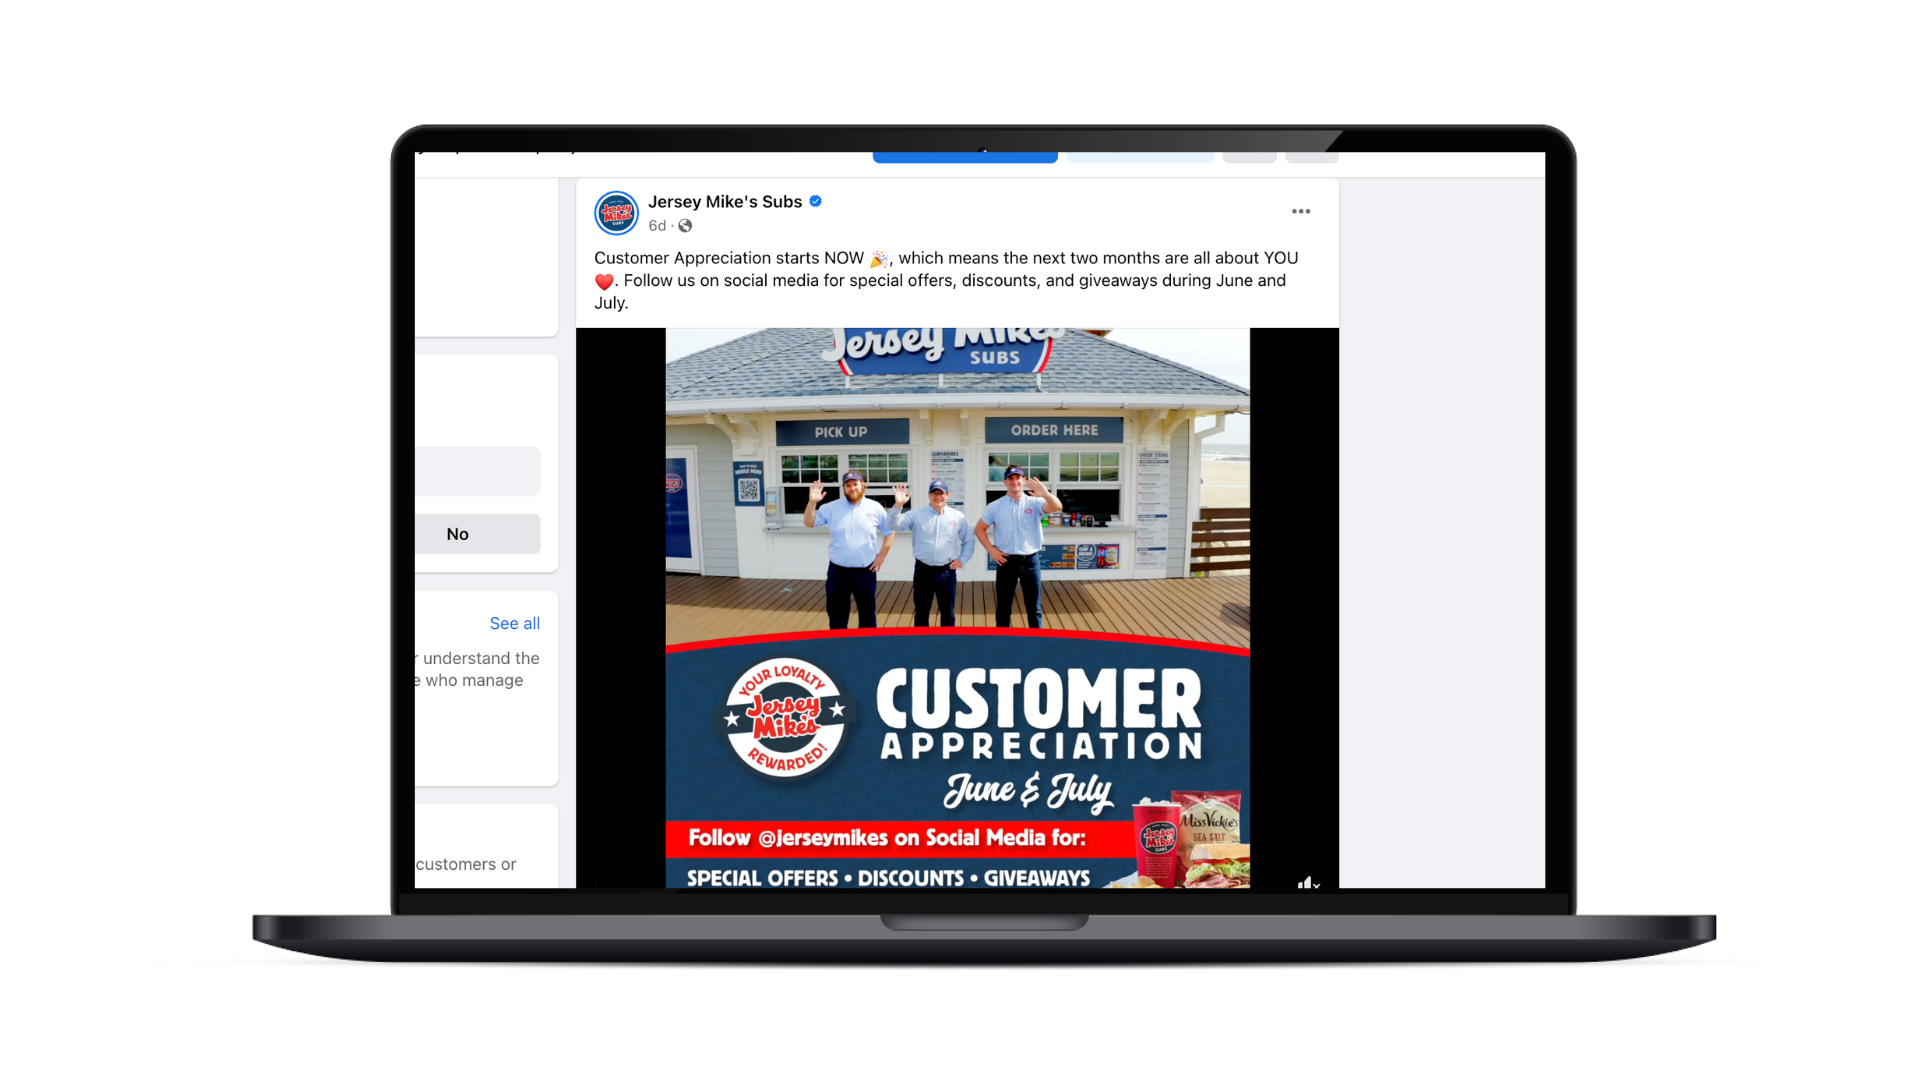 A customer appreciate social post on Facebook from one of Jersey Mike's Sub's local stores